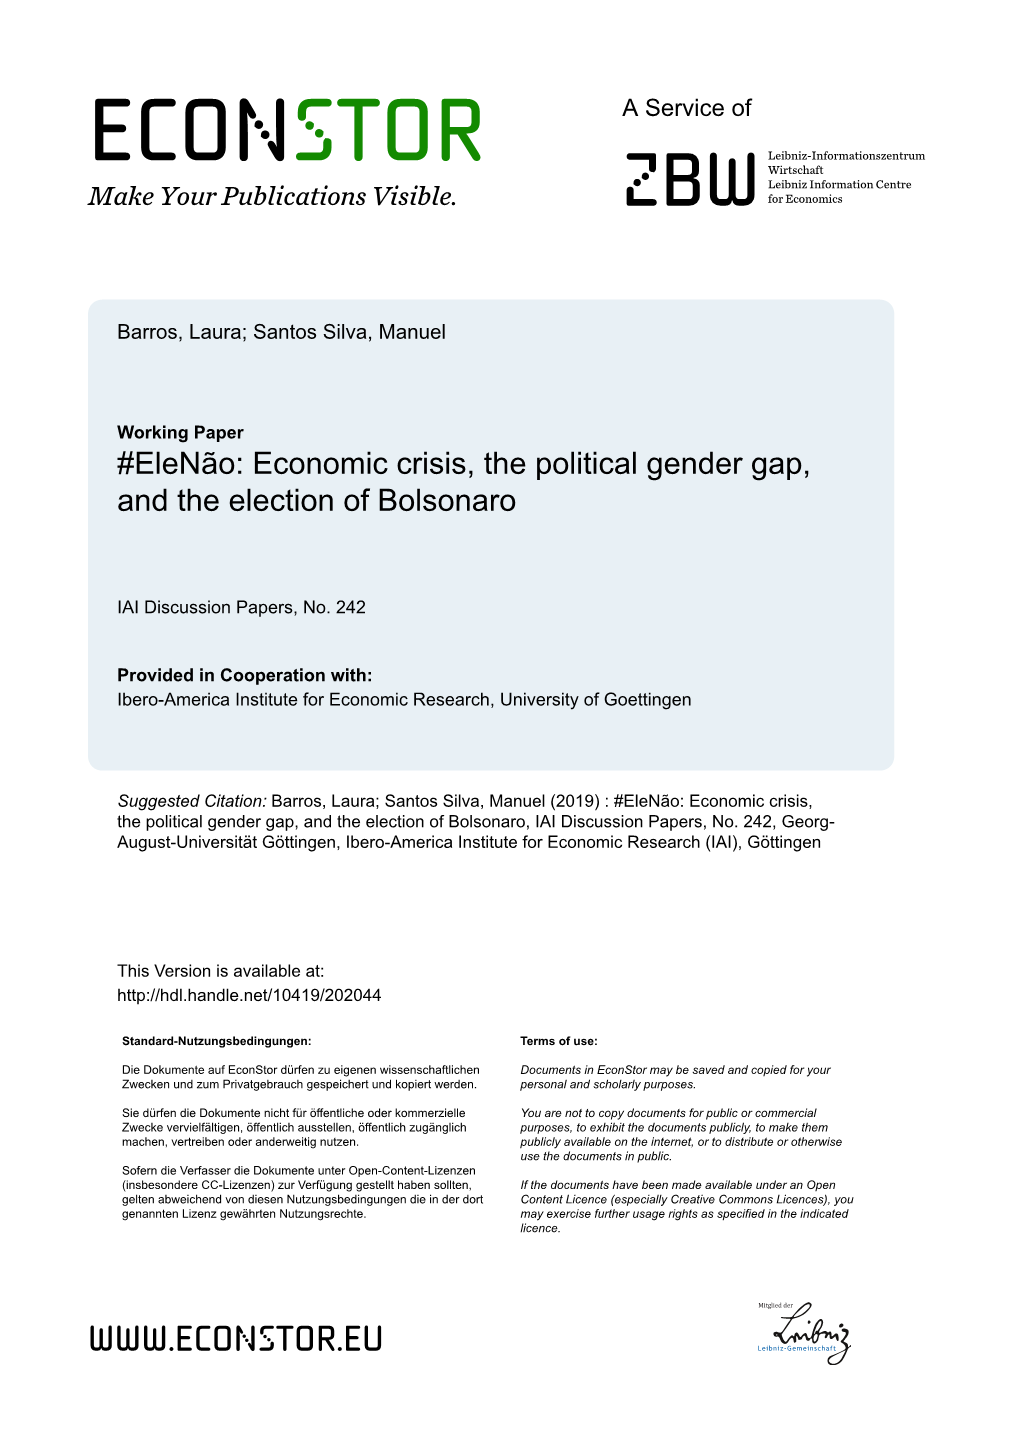 Economic Crisis, the Political Gender Gap, and the Election of Bolsonaro